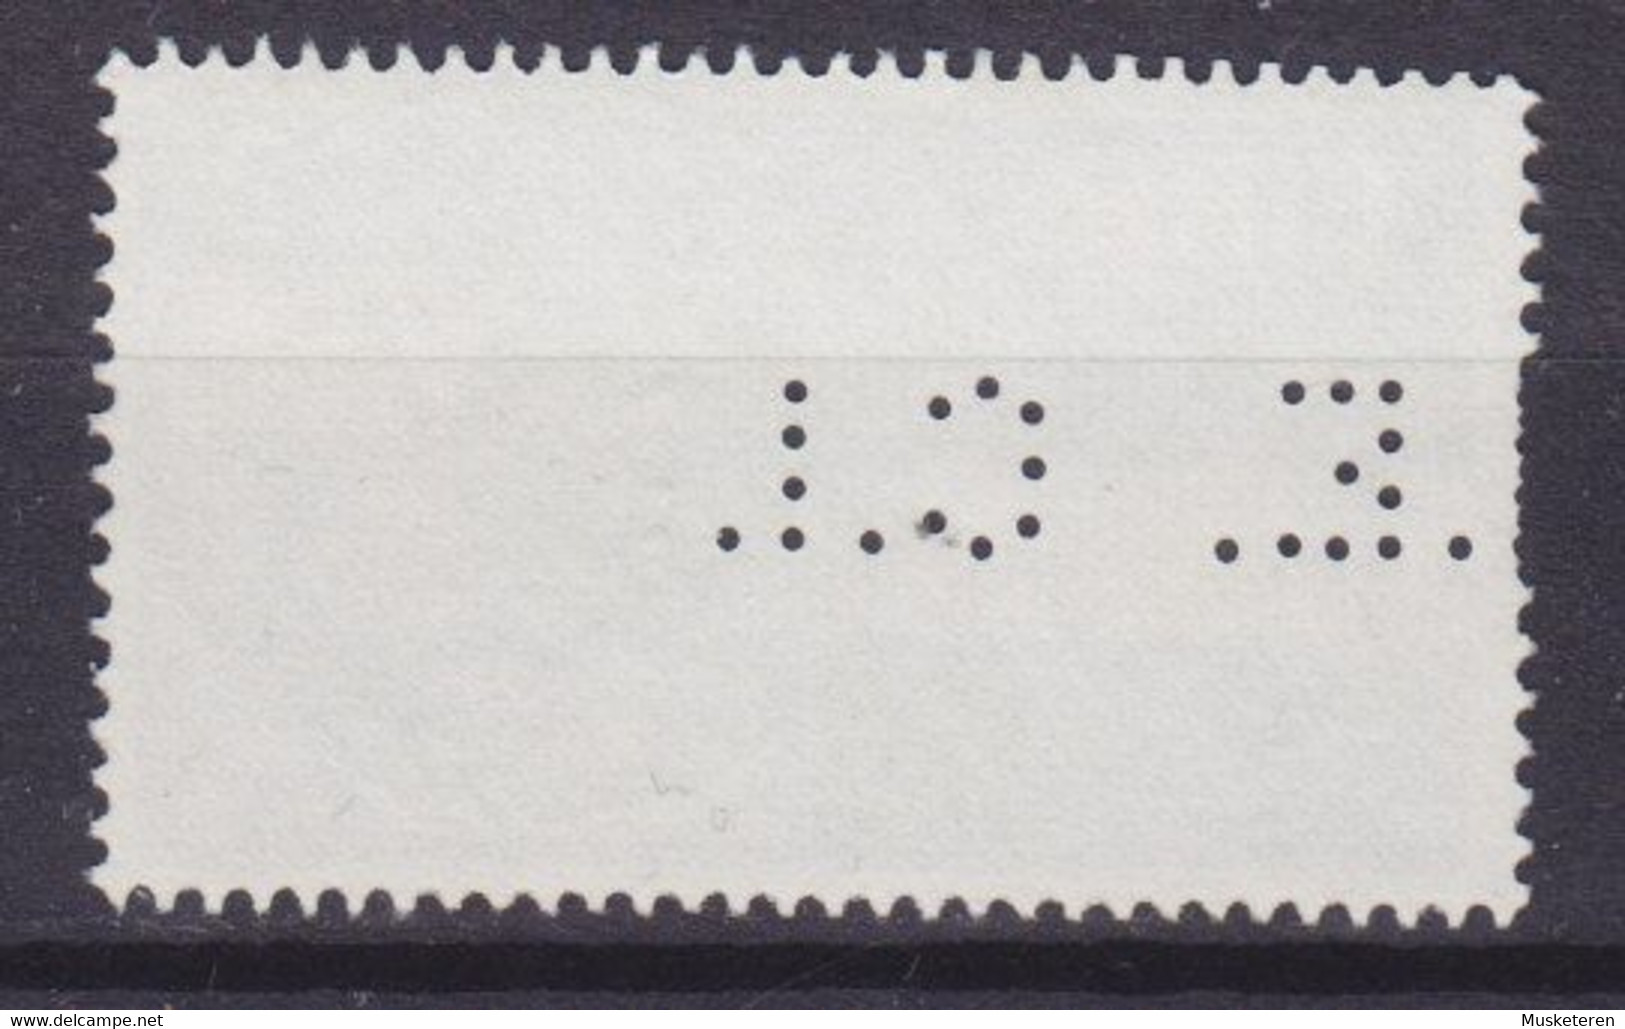 Ireland Perfin Perforé Lochung 'E.C.I.'? ERROR Variety Misplaced Perf. UIT Stamp CORCAIGH Cork 1965 Cancel - Ongetande, Proeven & Plaatfouten